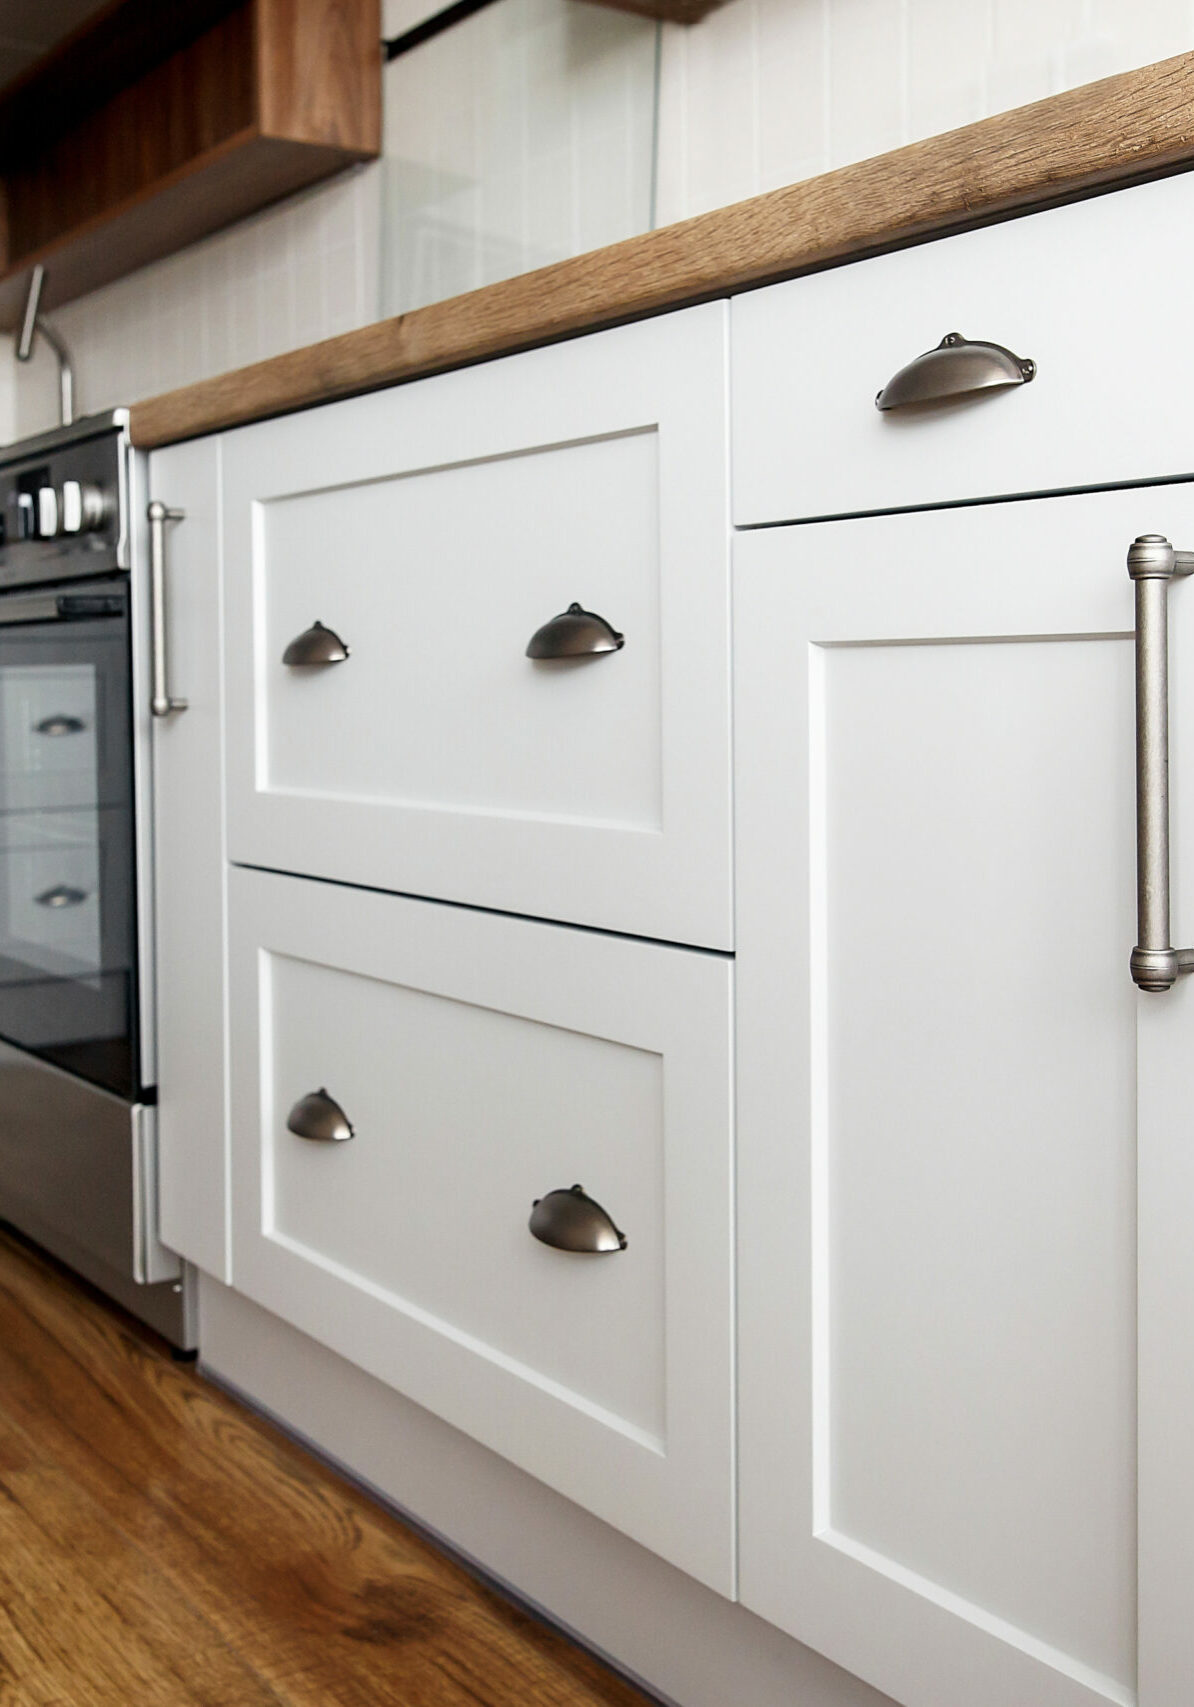 Stylish light gray handles on cabinets | Floor to Ceiling